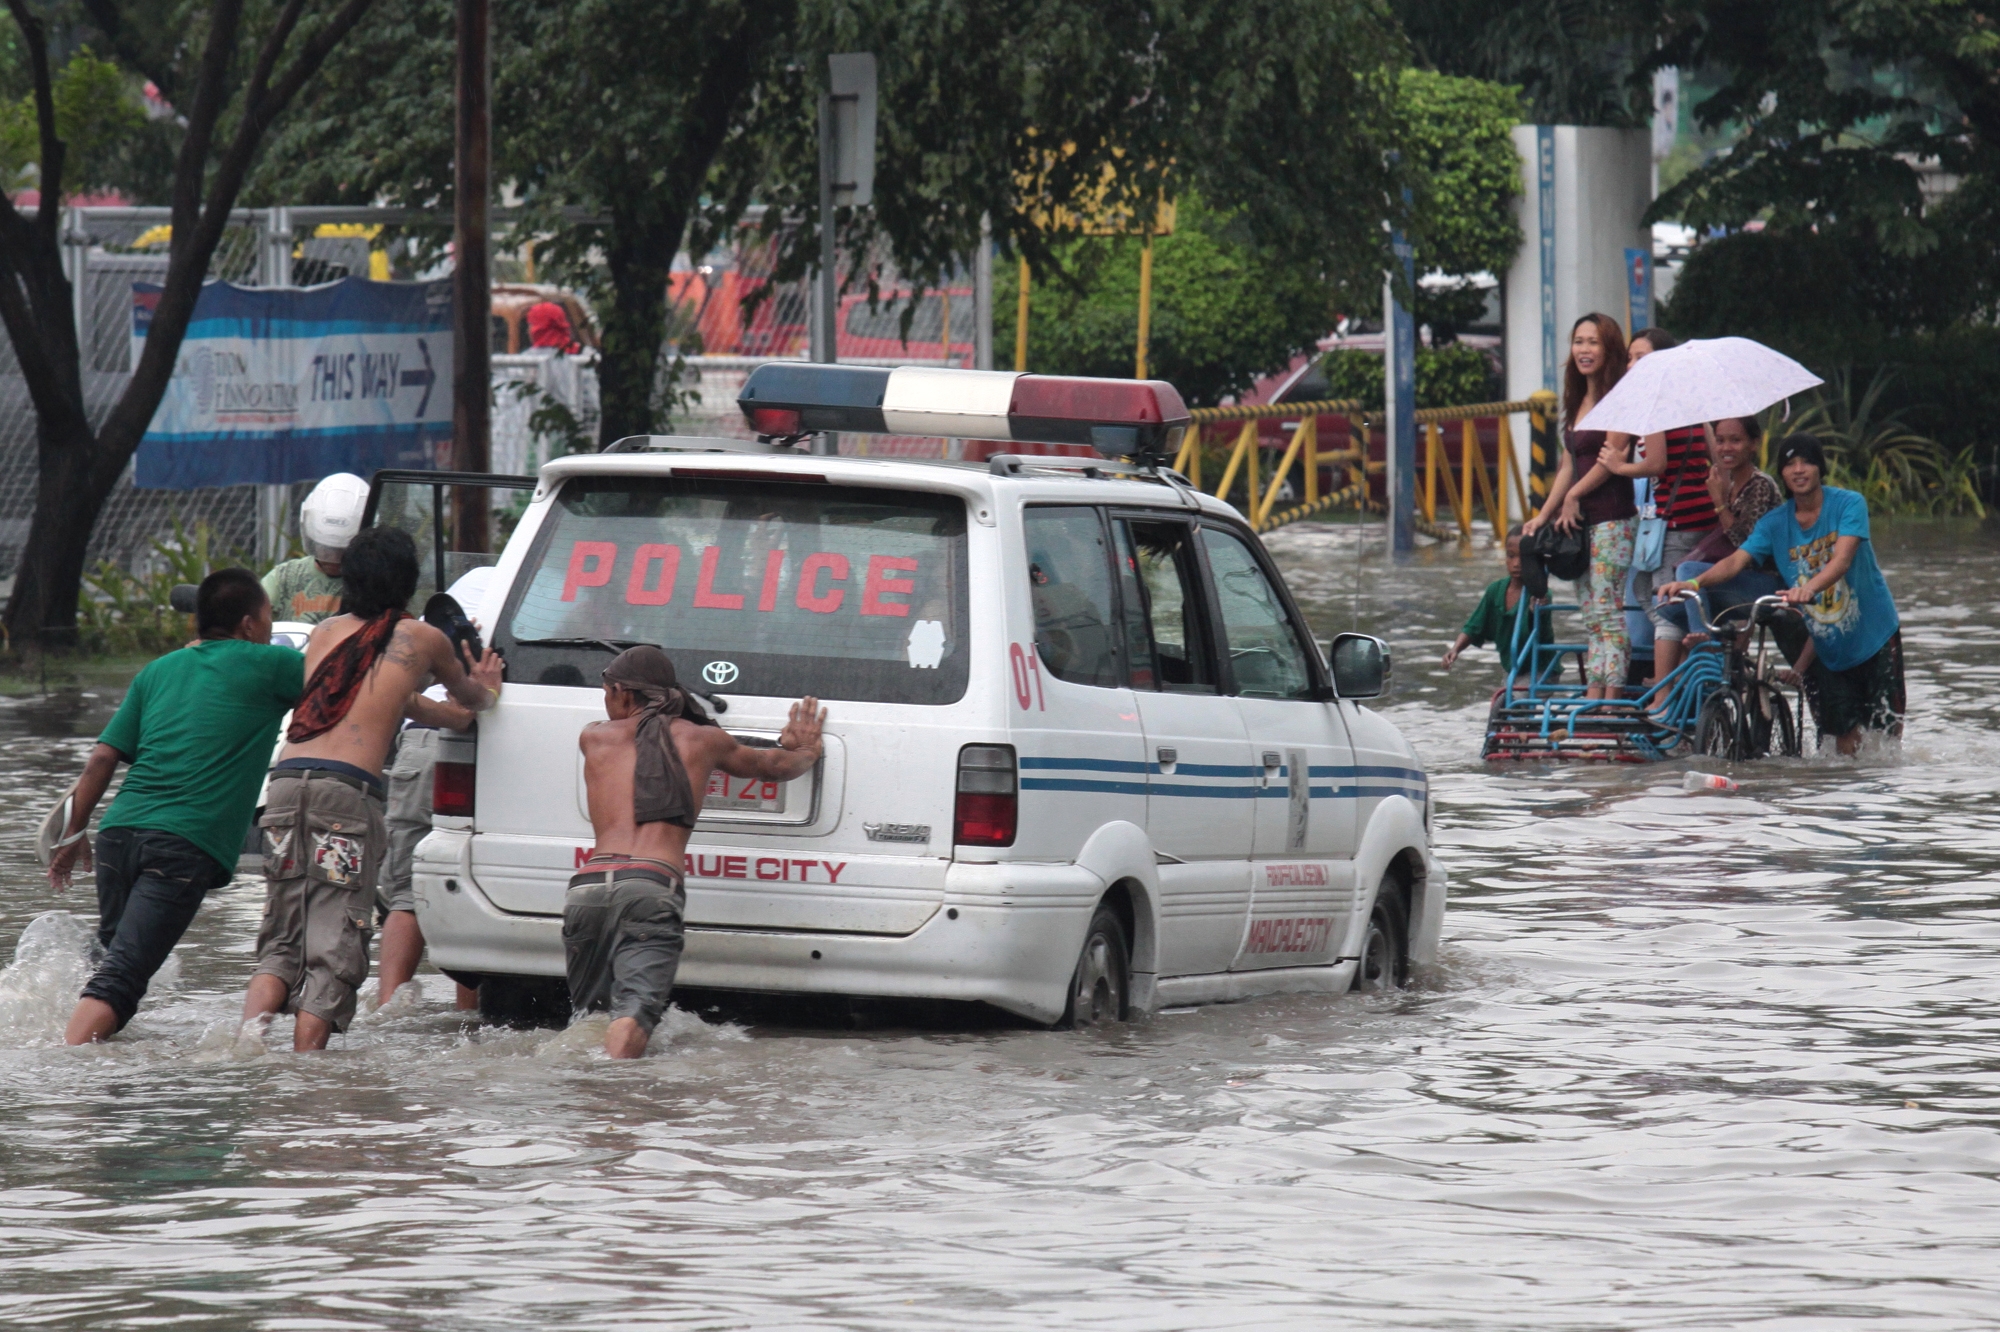  A patrol car of Mandaue City Police is being push while some people board a trisikad for P20 per person to cross over a knee deep flood water at Kaohsiung street North Reclamation Area Cebu City cuase by a heavy rain.(CDN PHOTO/JUNJIE MENDOZA)